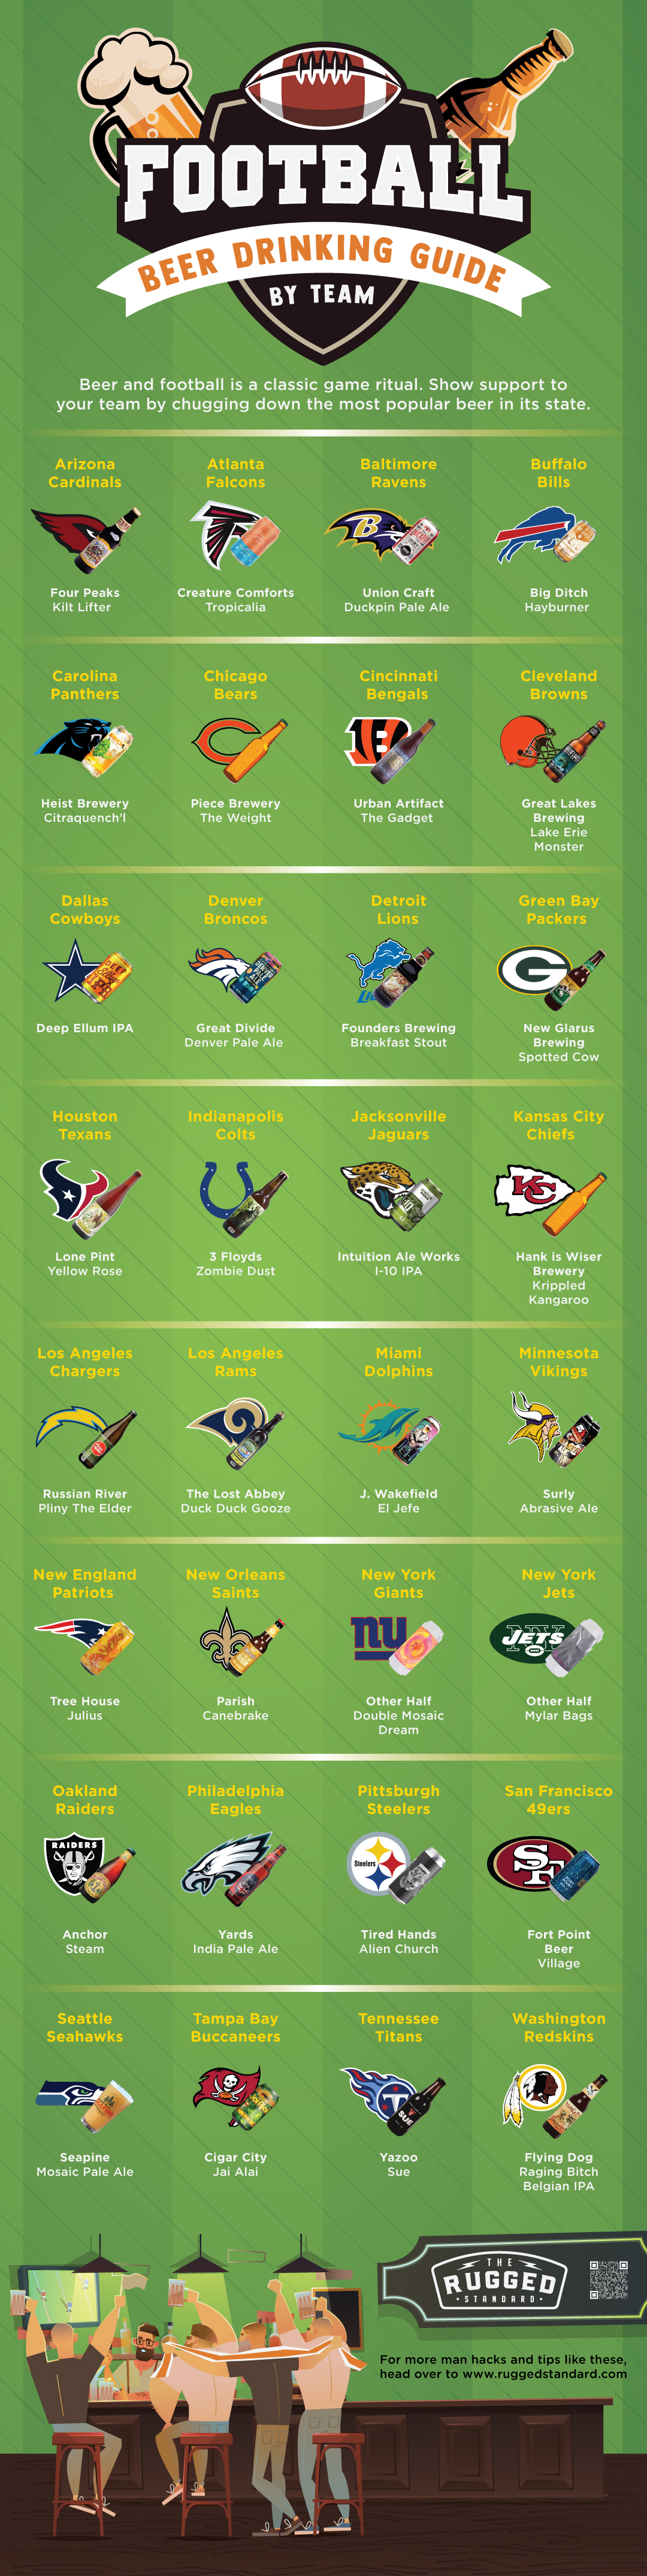 infographic | Rugged Standard-Football Beer Drinking Guide By Team